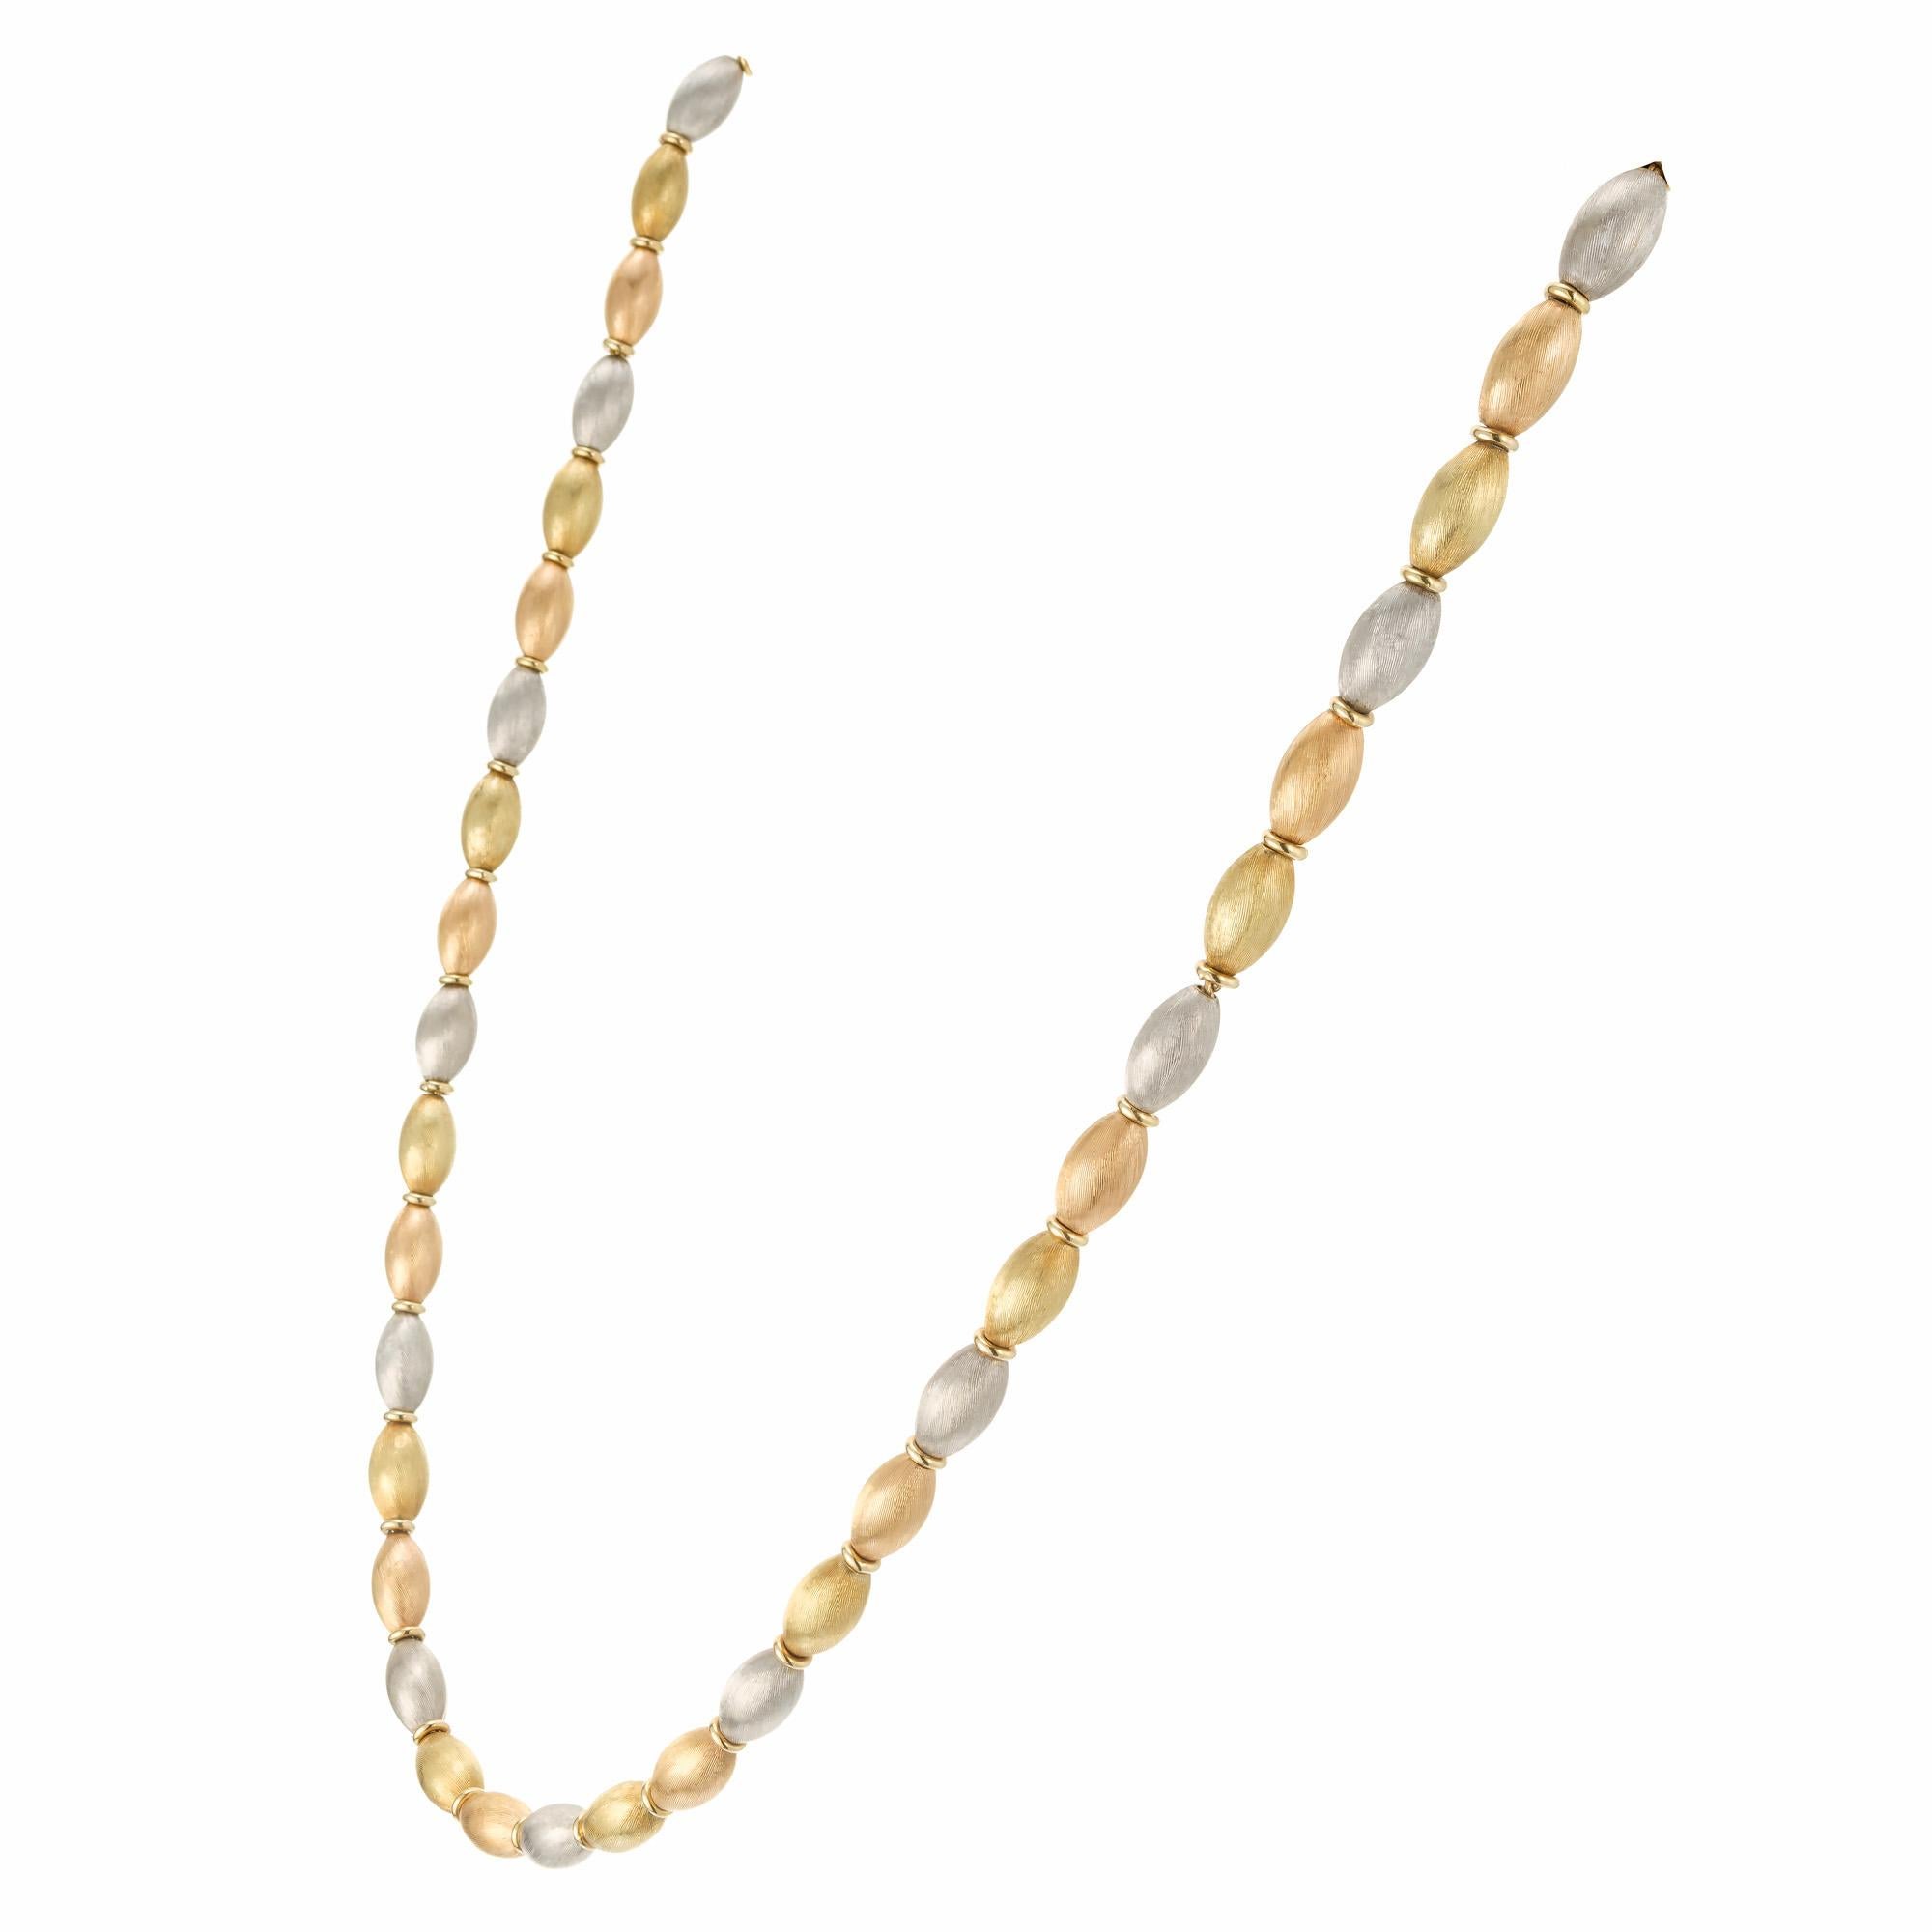 Textured yellow, rose and white gold bead necklace. 18k gold Oval bead's with 18k yellow gold round spacers. 18.5 inches.  

18k yellow gold 
Stamped: 18k
Hallmark: Italy
29.6 grams
Total length: 18.5 Inches
Width: 4.9mm
Thickness/depth: 4.9mm

